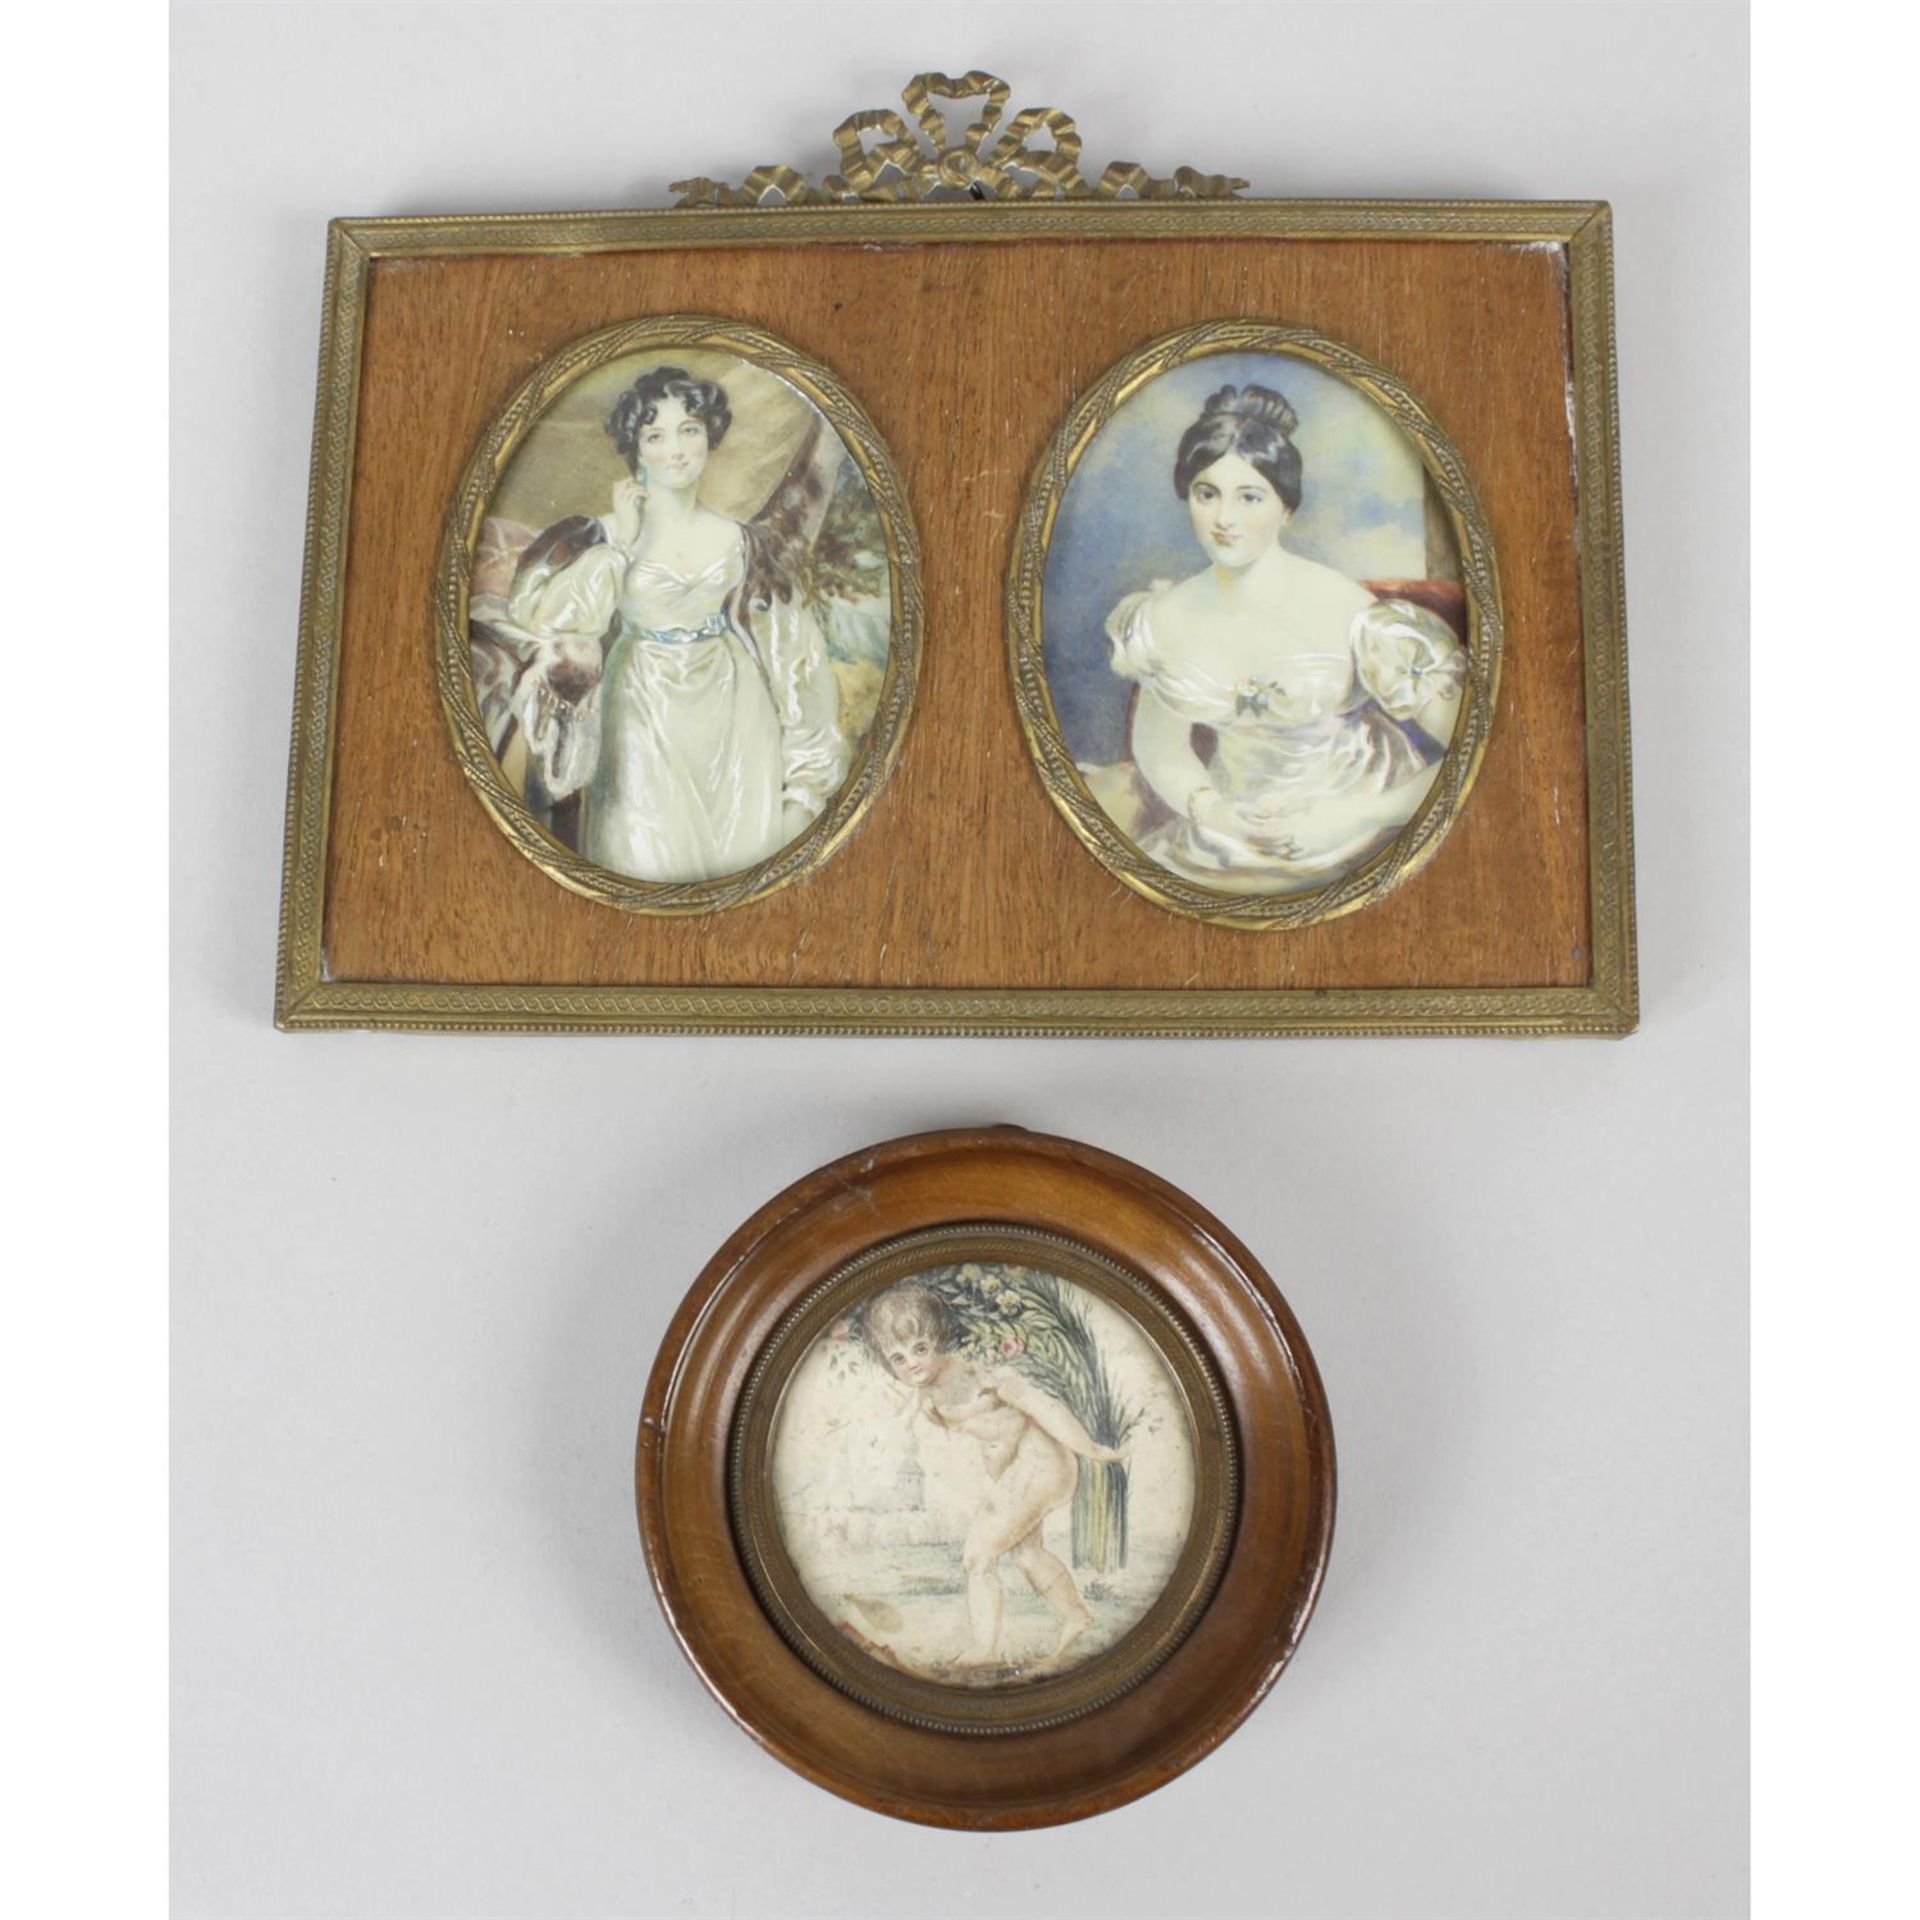 A pair of early 20th century portrait miniature.